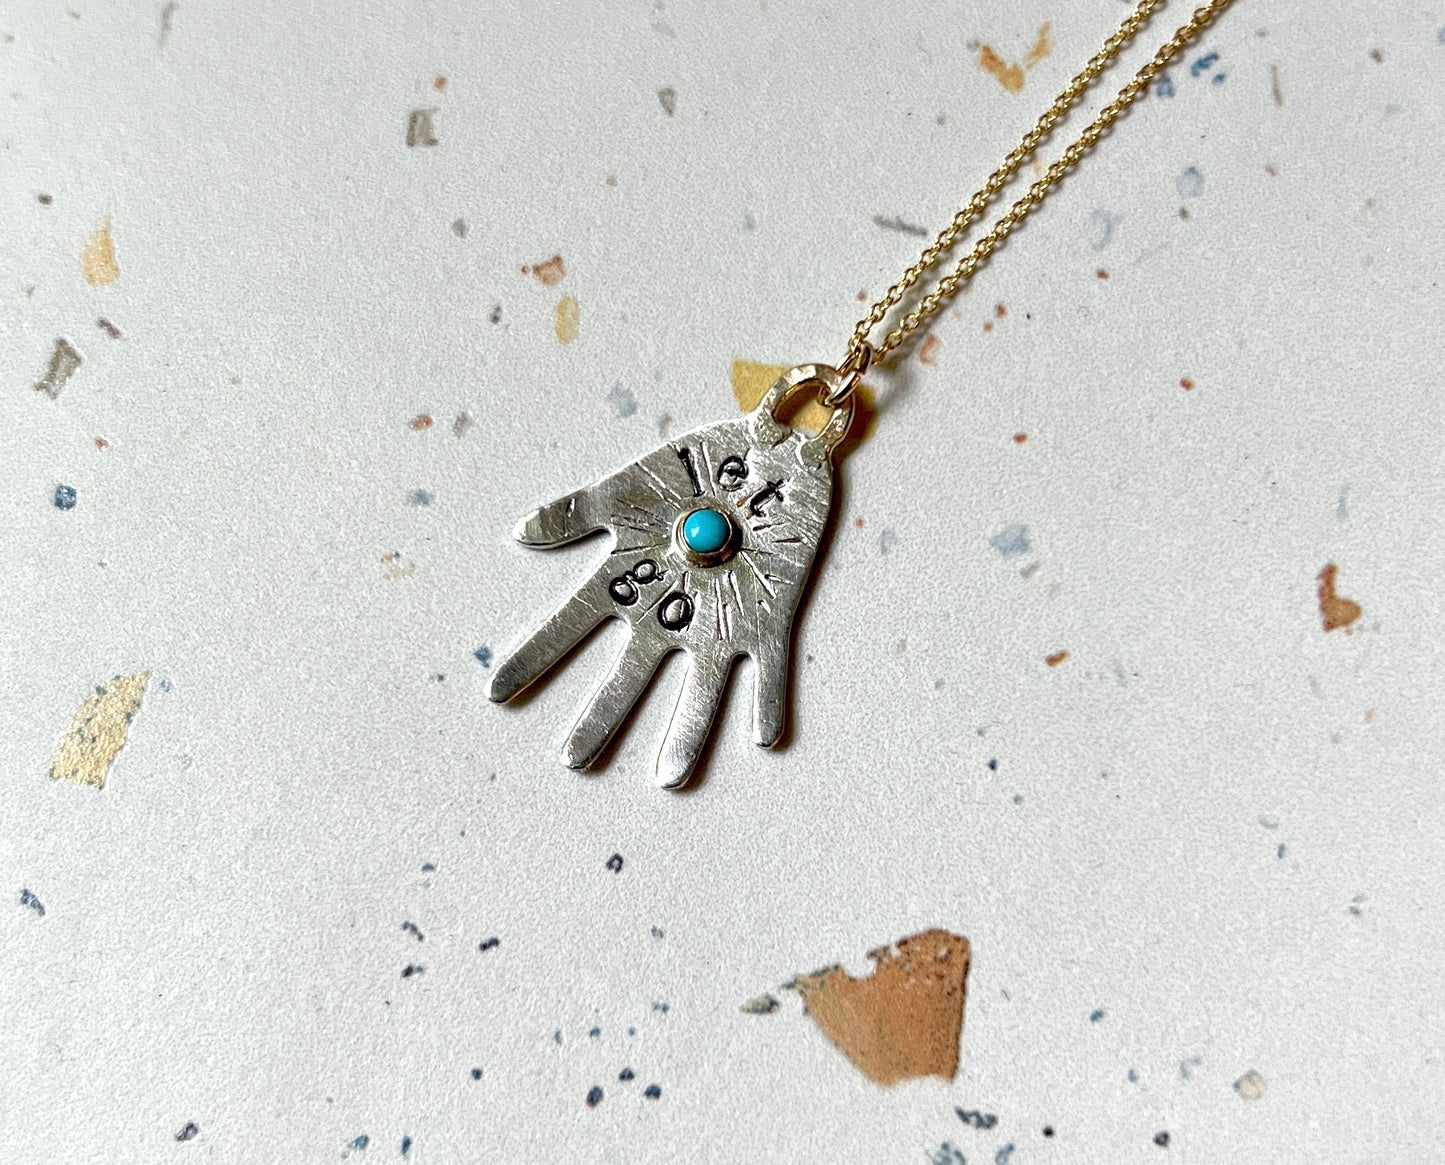 Let Go sterling silver hand pendant with turquoise pendant